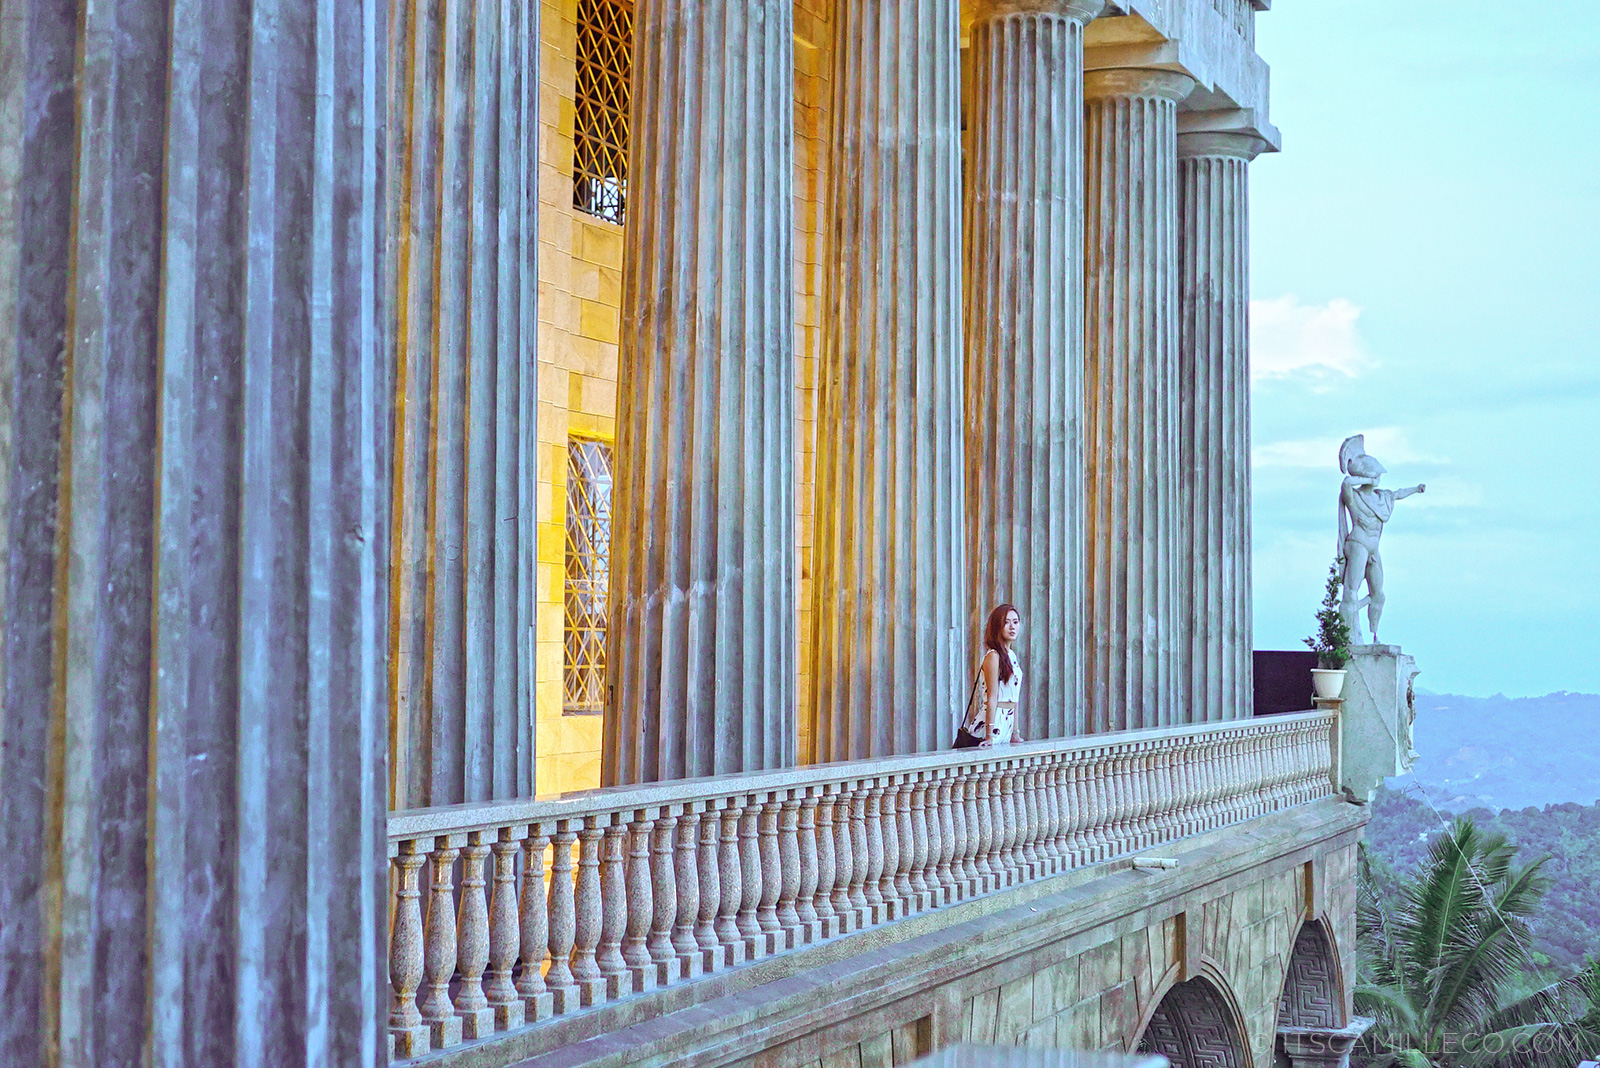 Temple Of Leah - www.itscamilleco.com